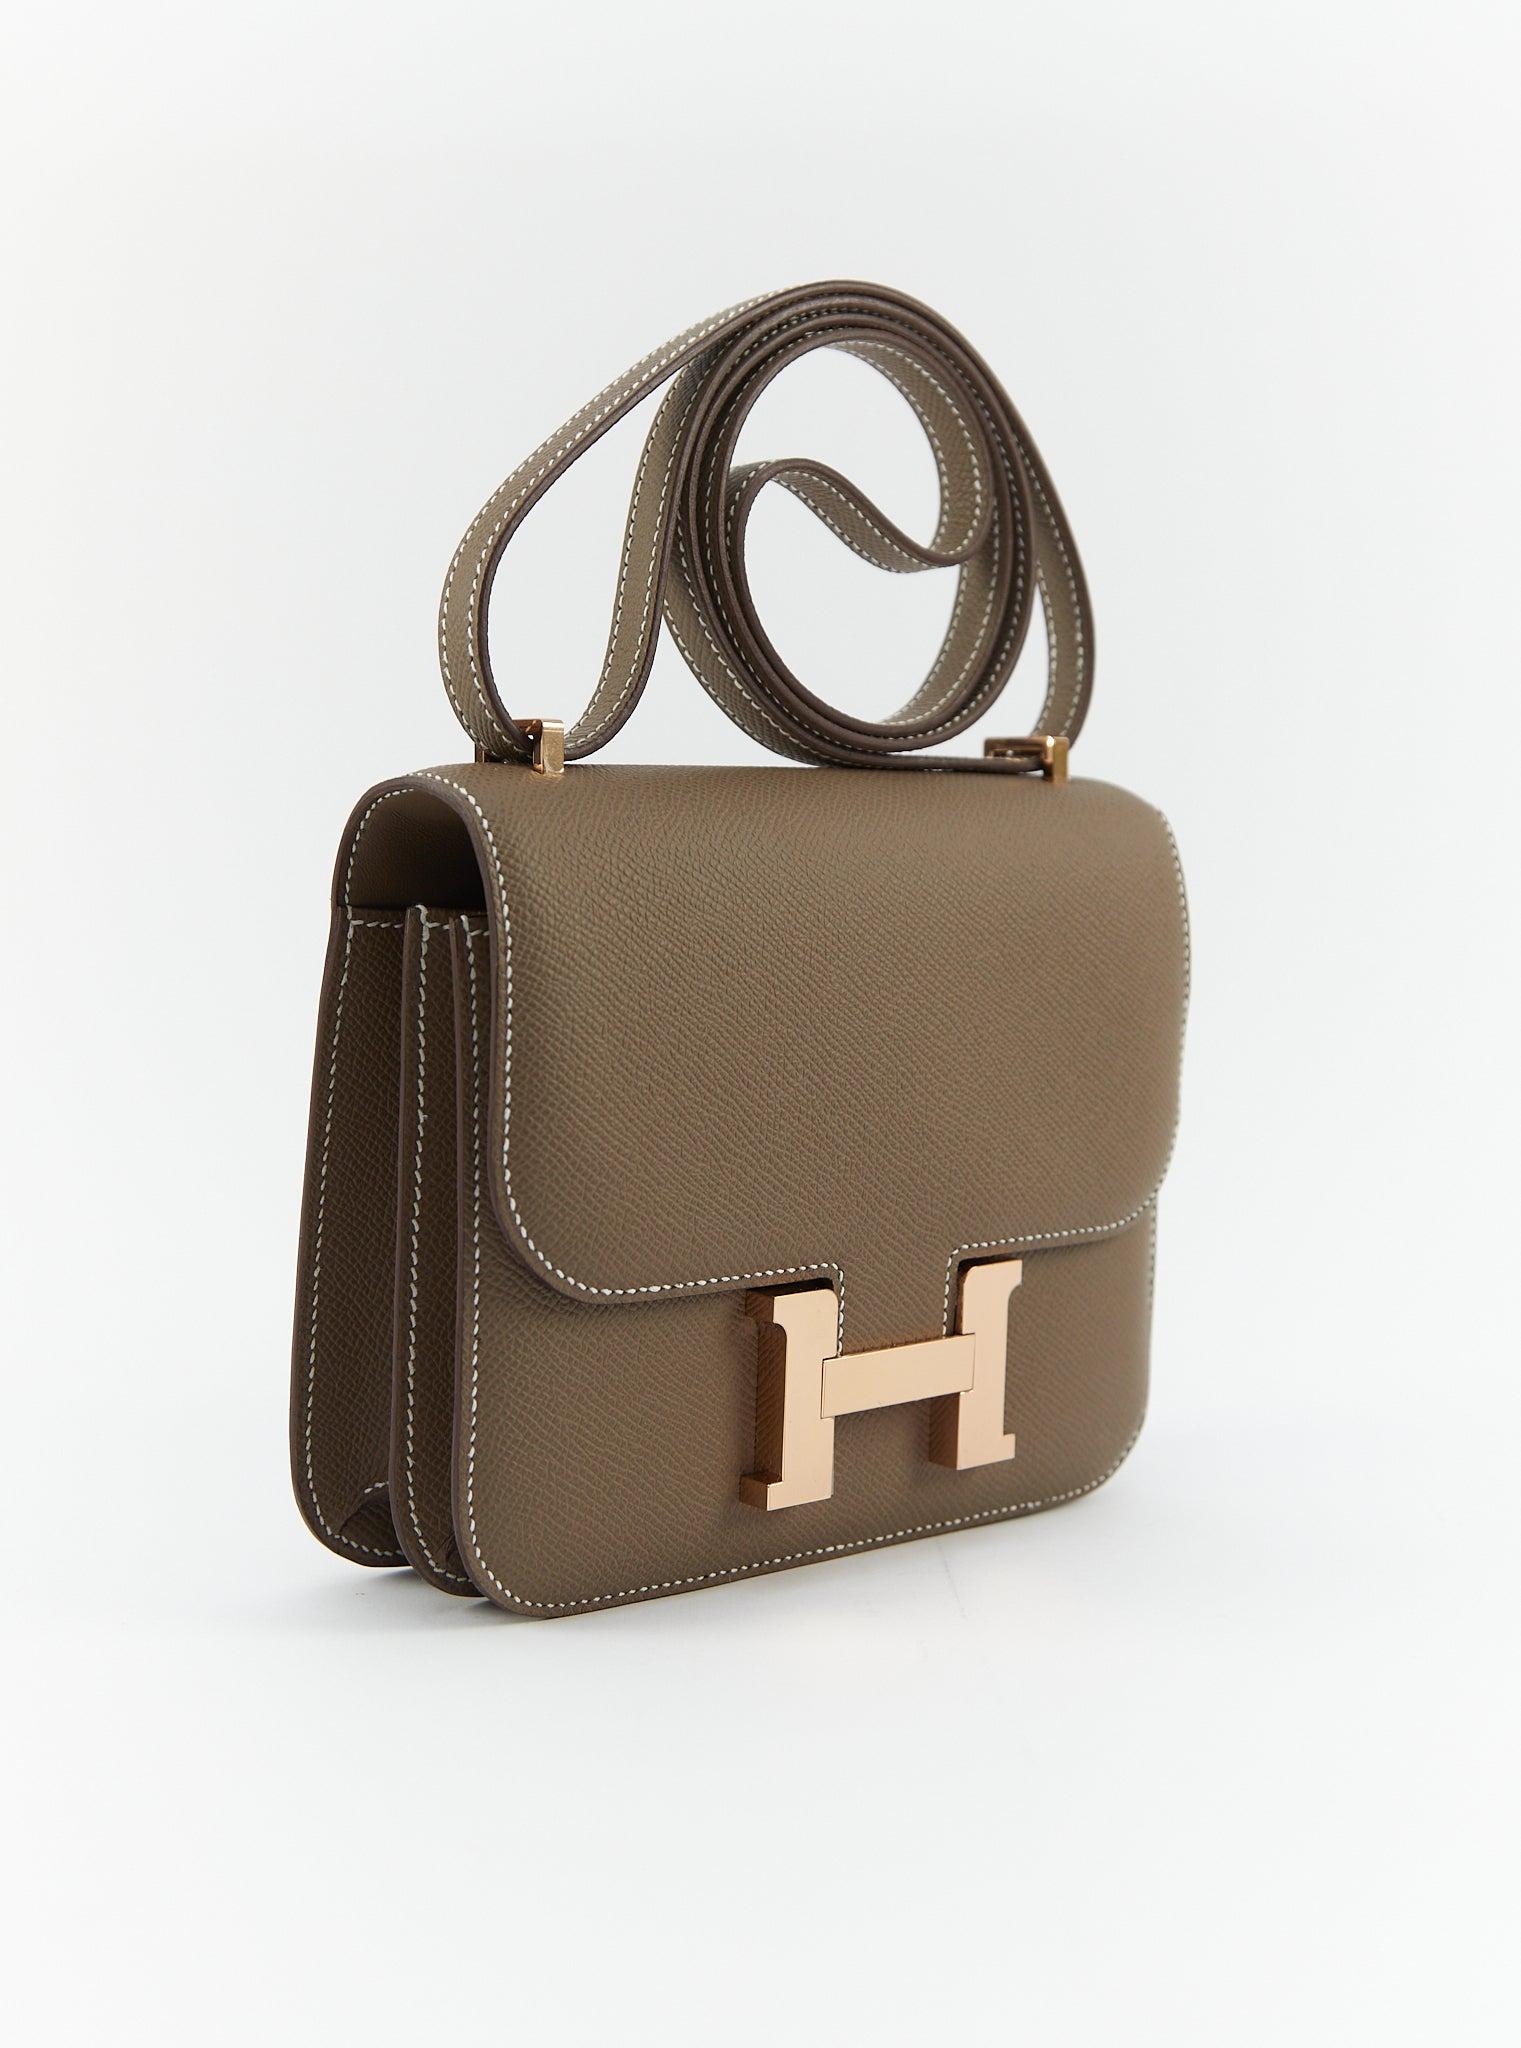 HERMÈS CONSTANCE 18CM ETOUPE Epsom Leather with Rose Gold Hardware In Excellent Condition For Sale In London, GB